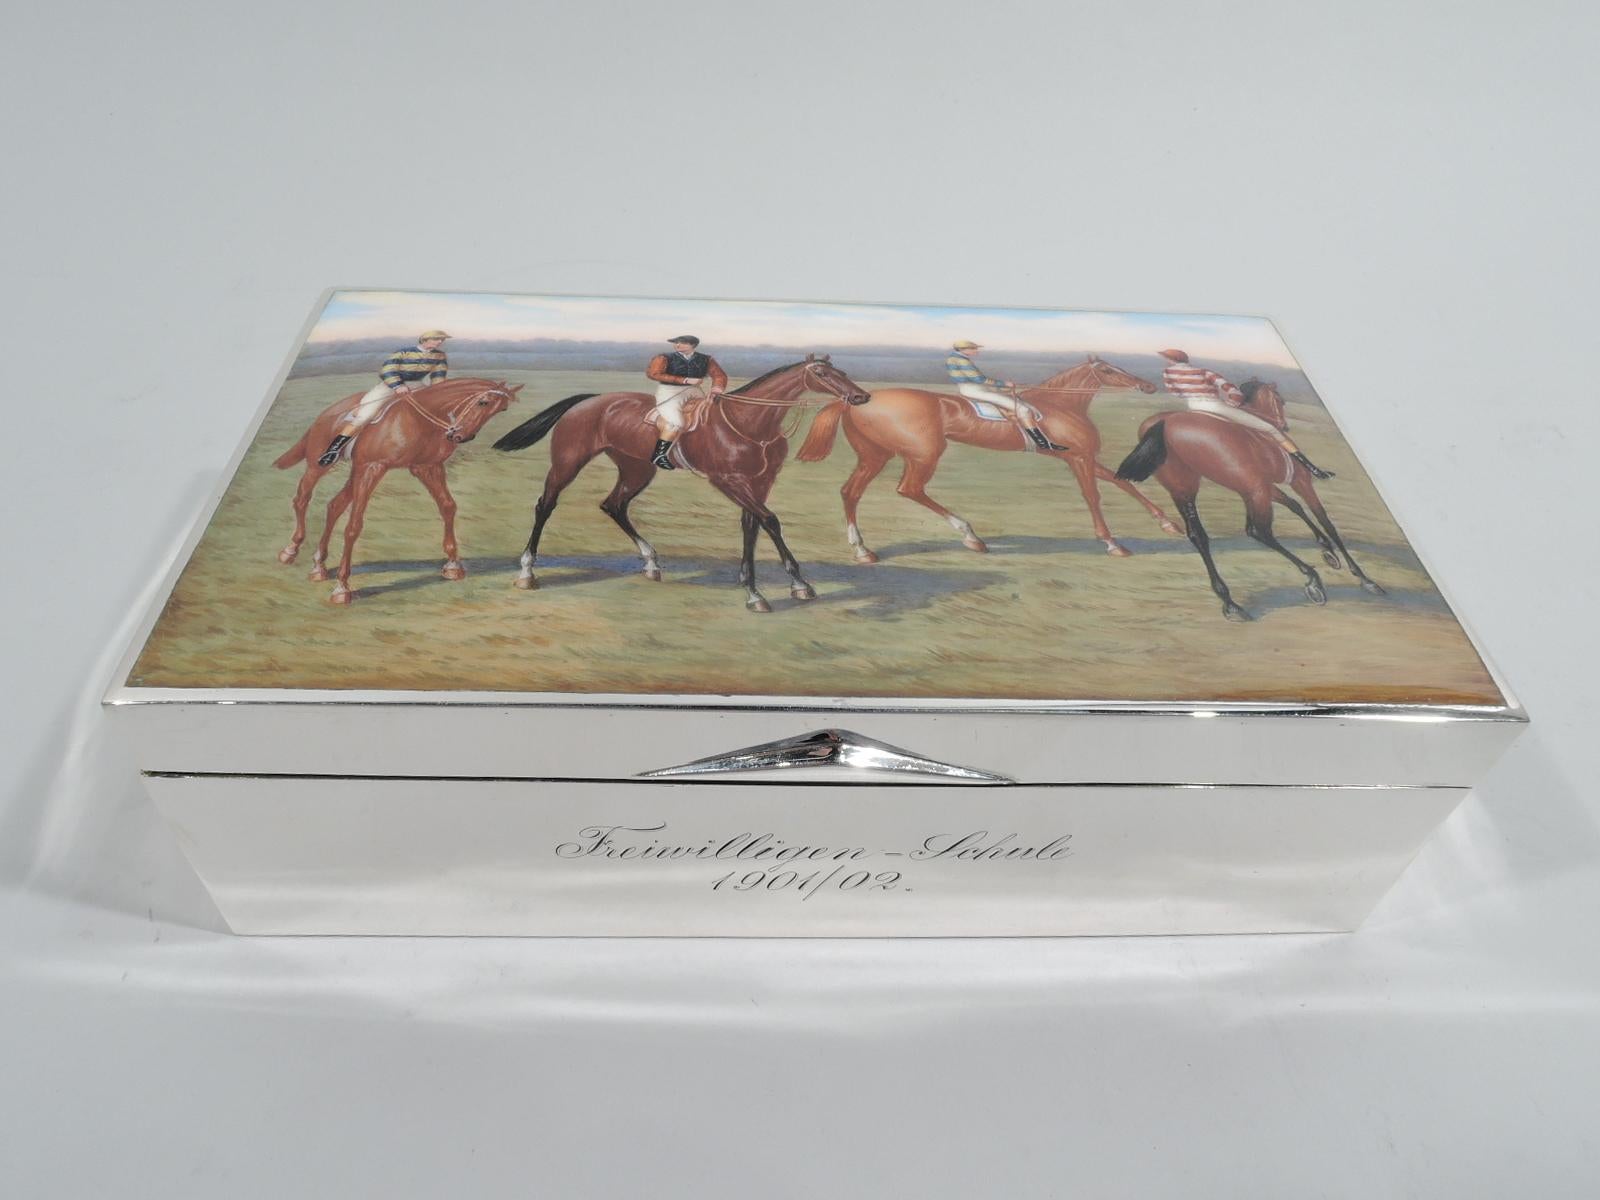 Turn-of-the-century Austrian 835 silver horse-themed box. Made by George Adam Scheid in Austria. Rectangular with straight sides. Cover hinged with triangular tab. On cover top is enameled scene with four mounted jockeys in bright silks, casting